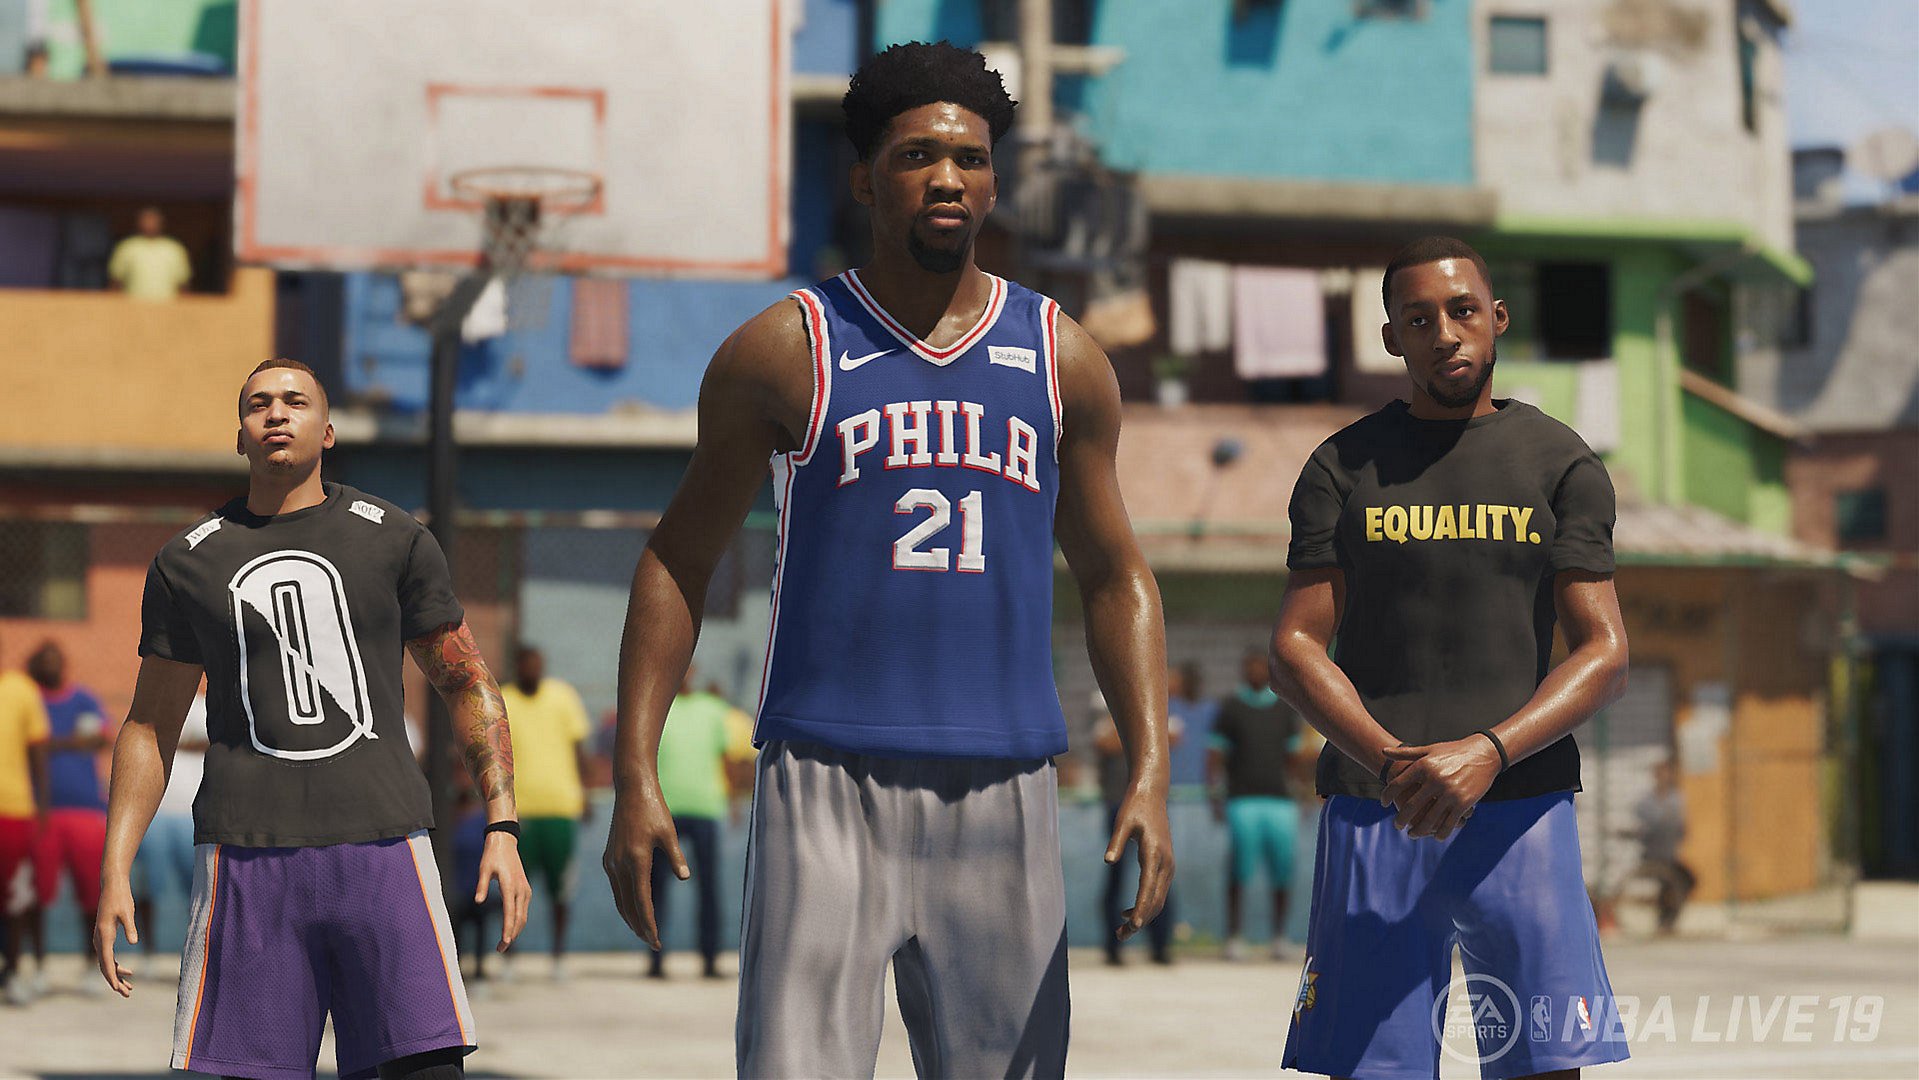 NBA Live 20 isnt happening this year after all